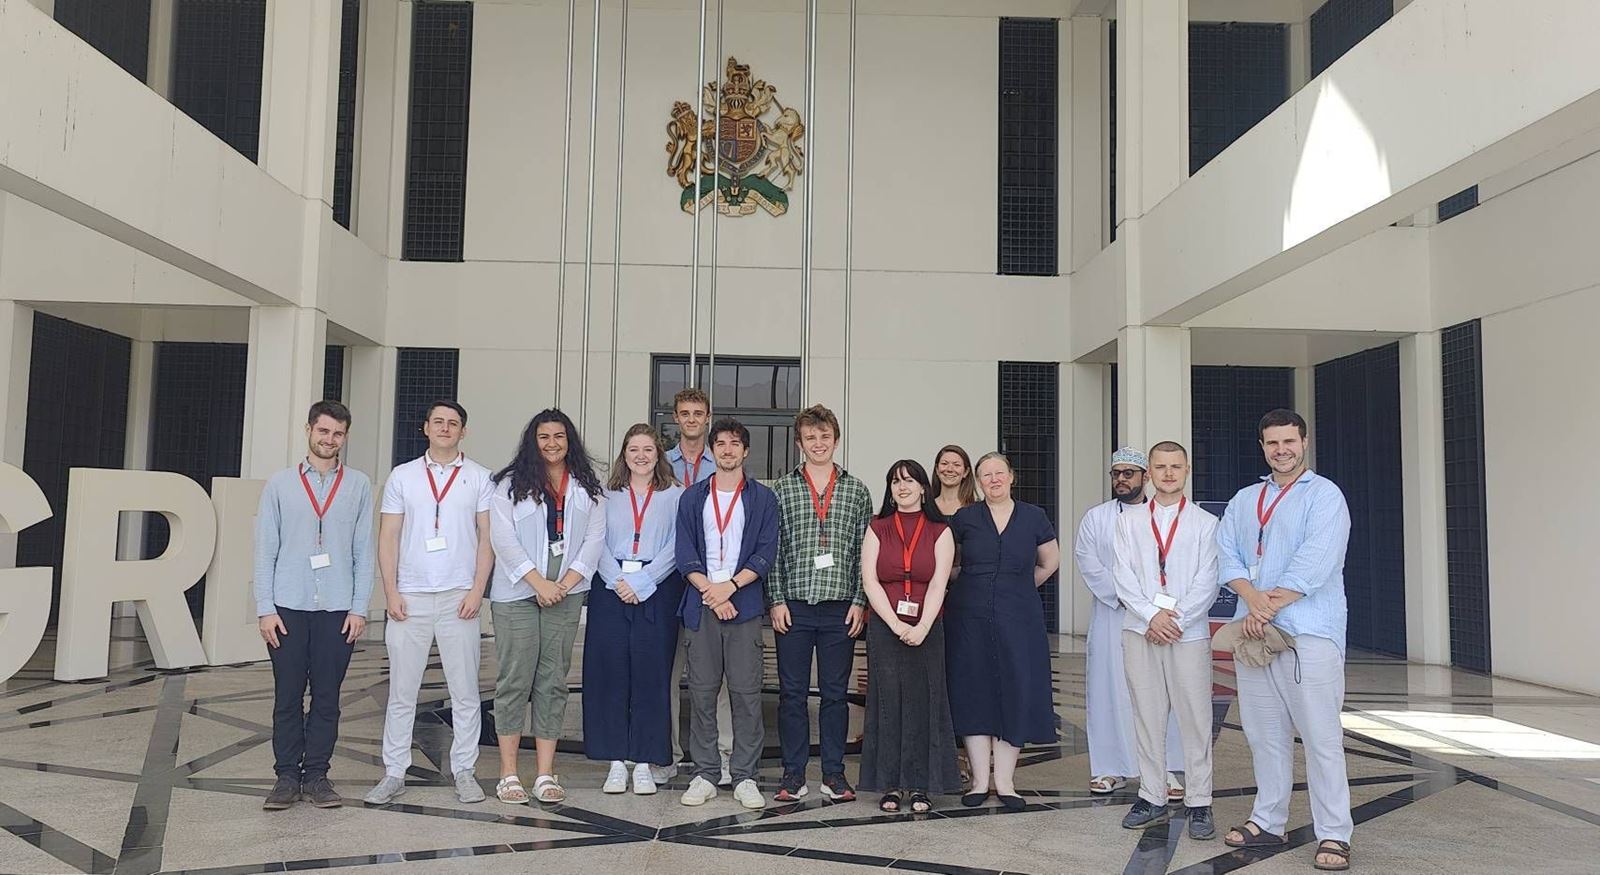 Our Arabic Language Scheme Students meet with the British Ambassador to Oman, Dr Liane Saunders